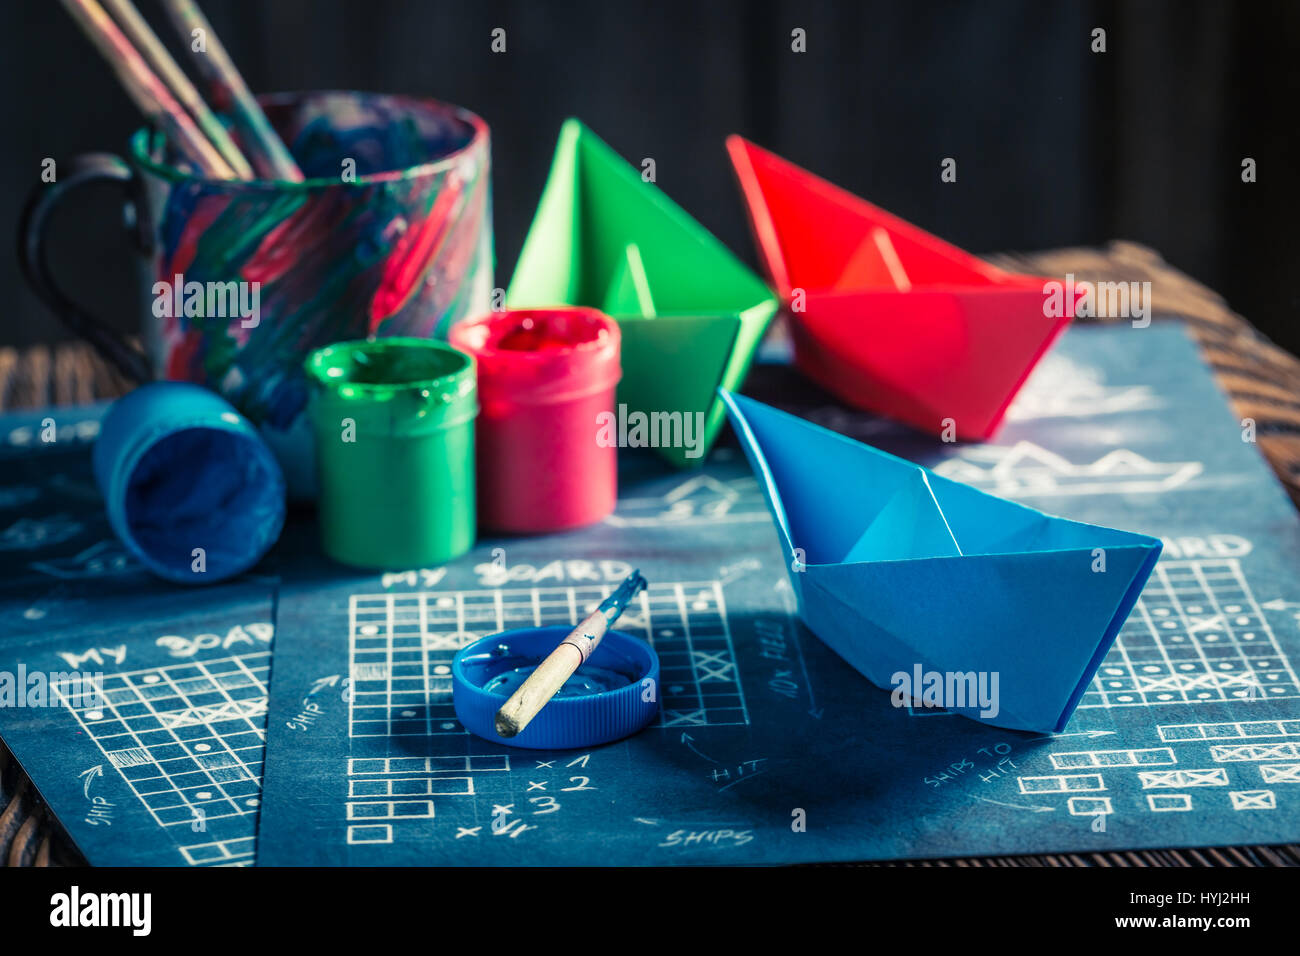 Vintage battleship paper game with red and blue ships Stock Photo